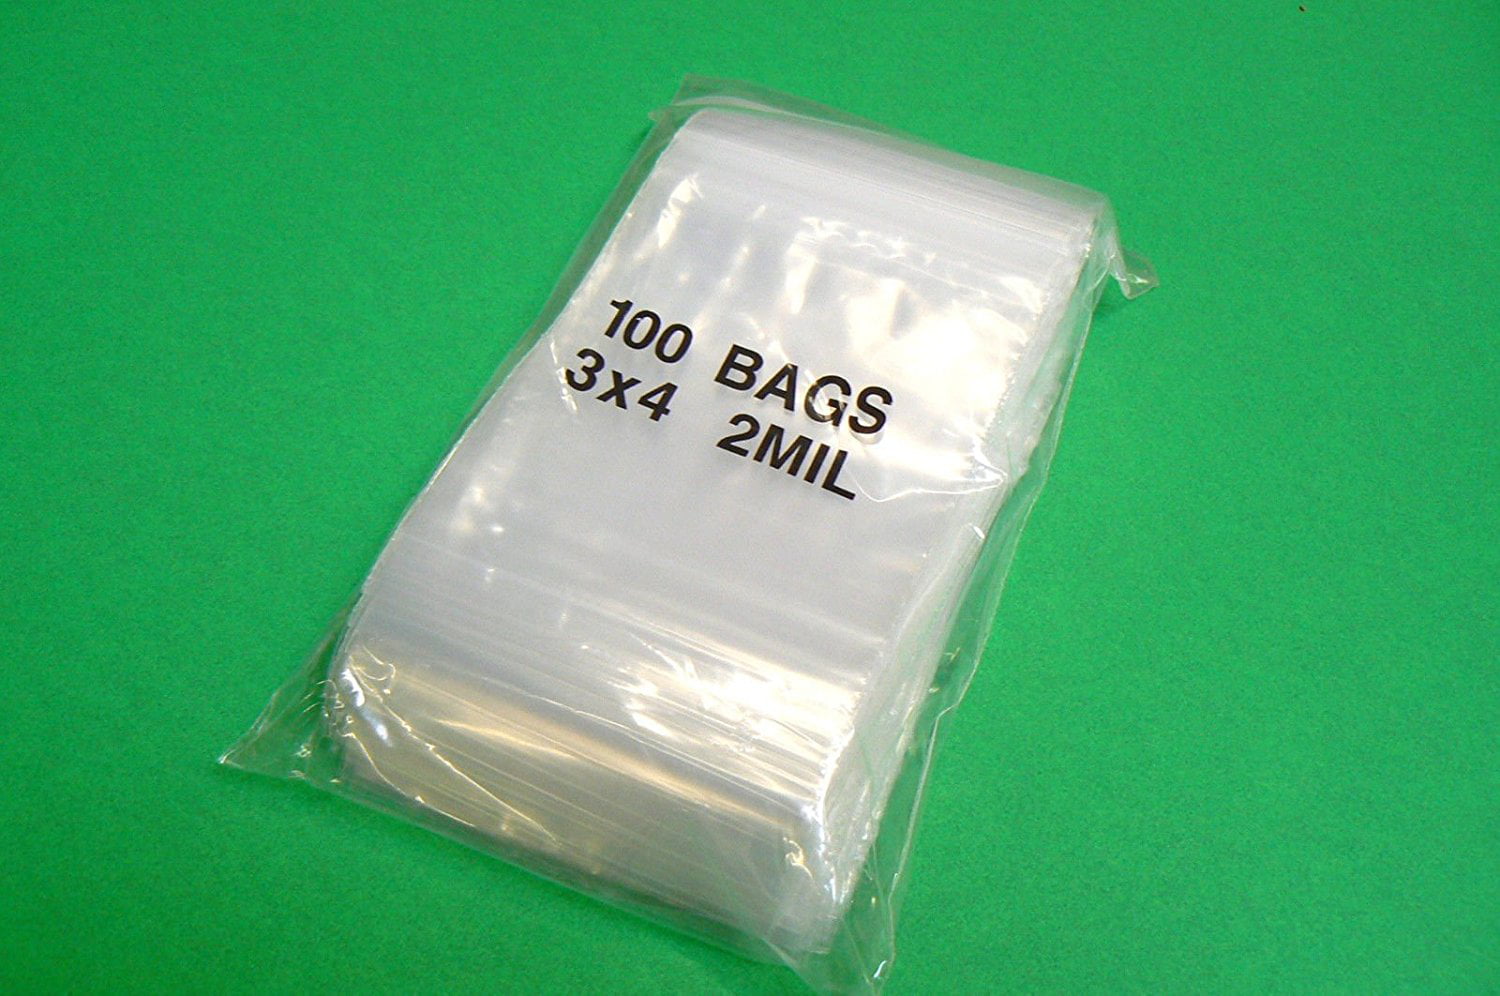 UNIS 3 X 4 Inch 2Mil 100 Count Poly Reclosable Plastic Zip Clear Bag